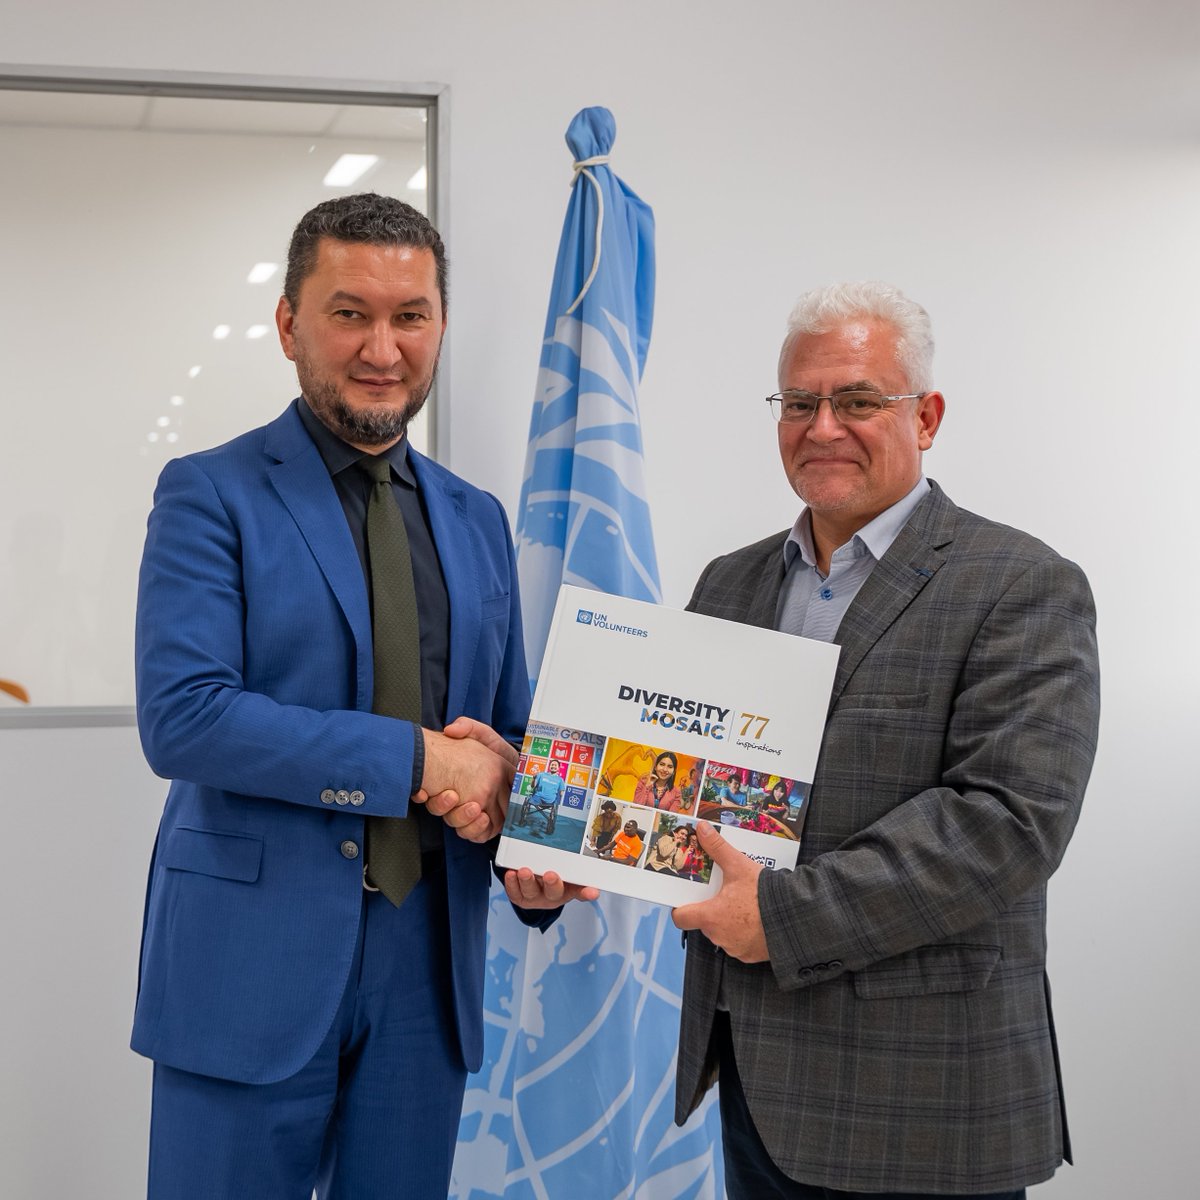 “Volunteerism is an important pathway for promoting inclusion & tackling development challenges facing our world”-- @lionellaurens_, Resident Representative @UNDPSomalia met with @ToilyKurbanov, UNV Executive Coord., discussing #PWD, inclusion and #DiversityMosaic book on #IDPD🇸🇴